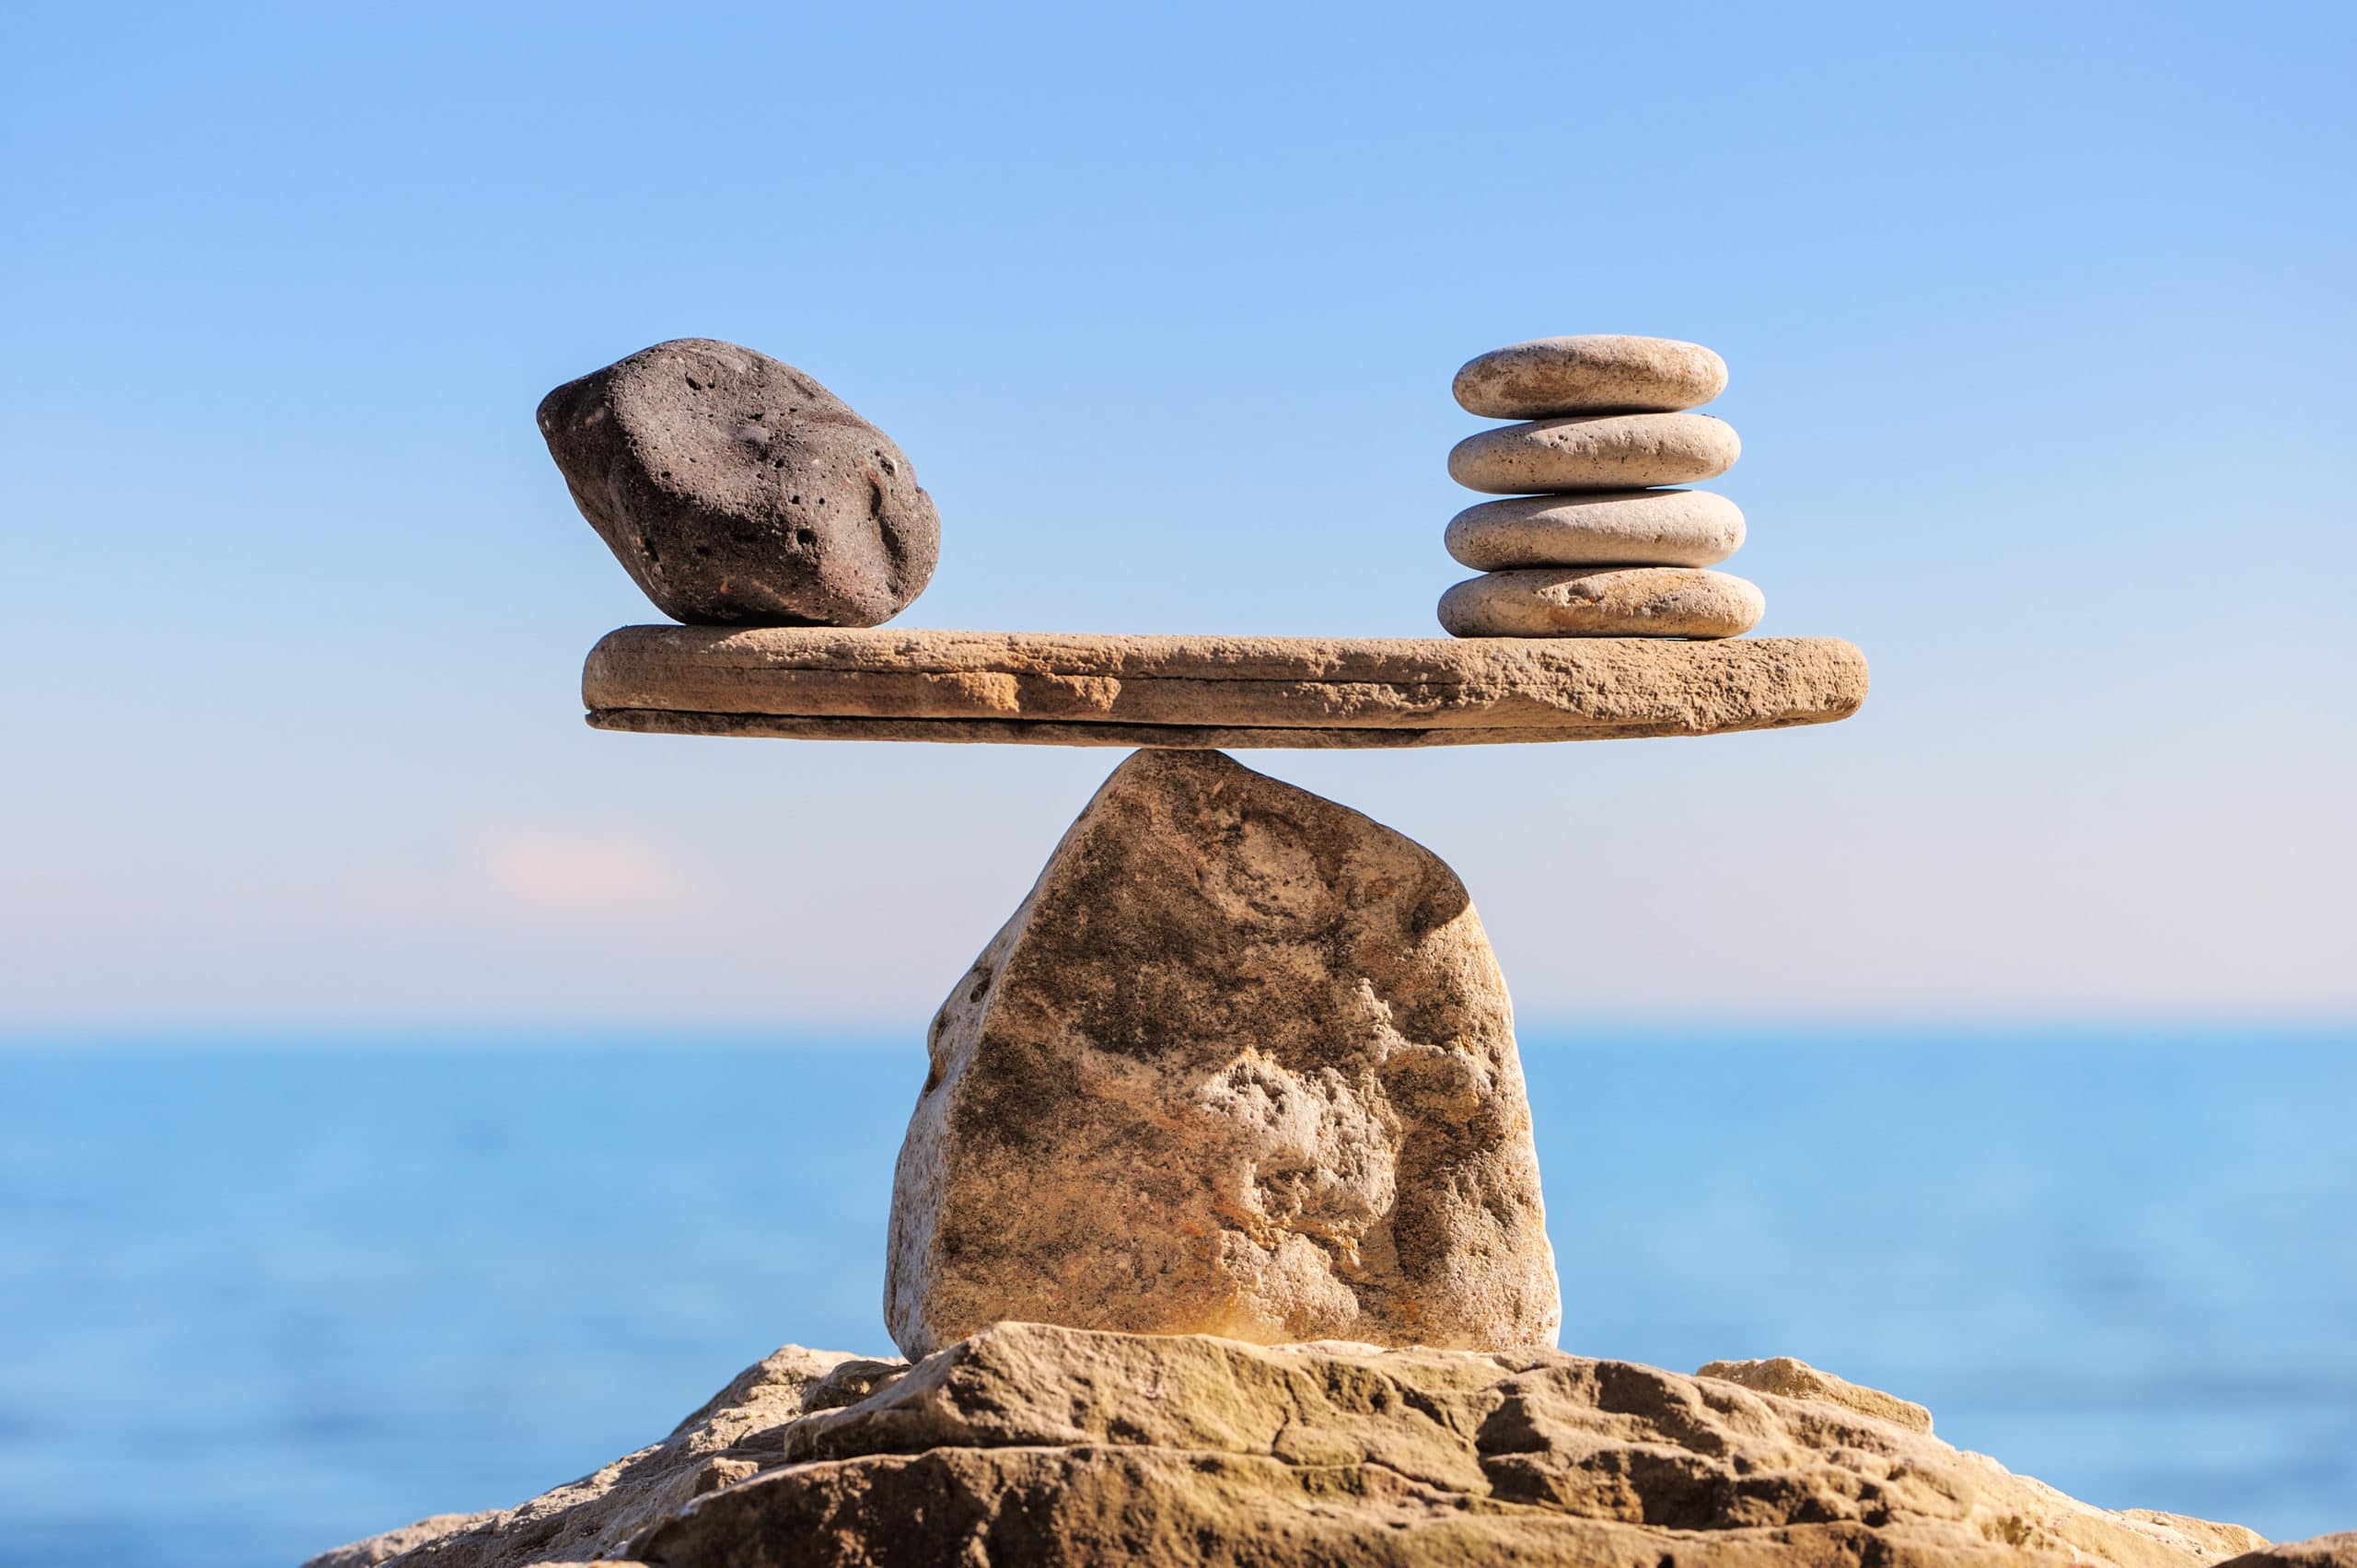 Picture of two stacks of rocks balancing on a flat rock on top of a bigger rock